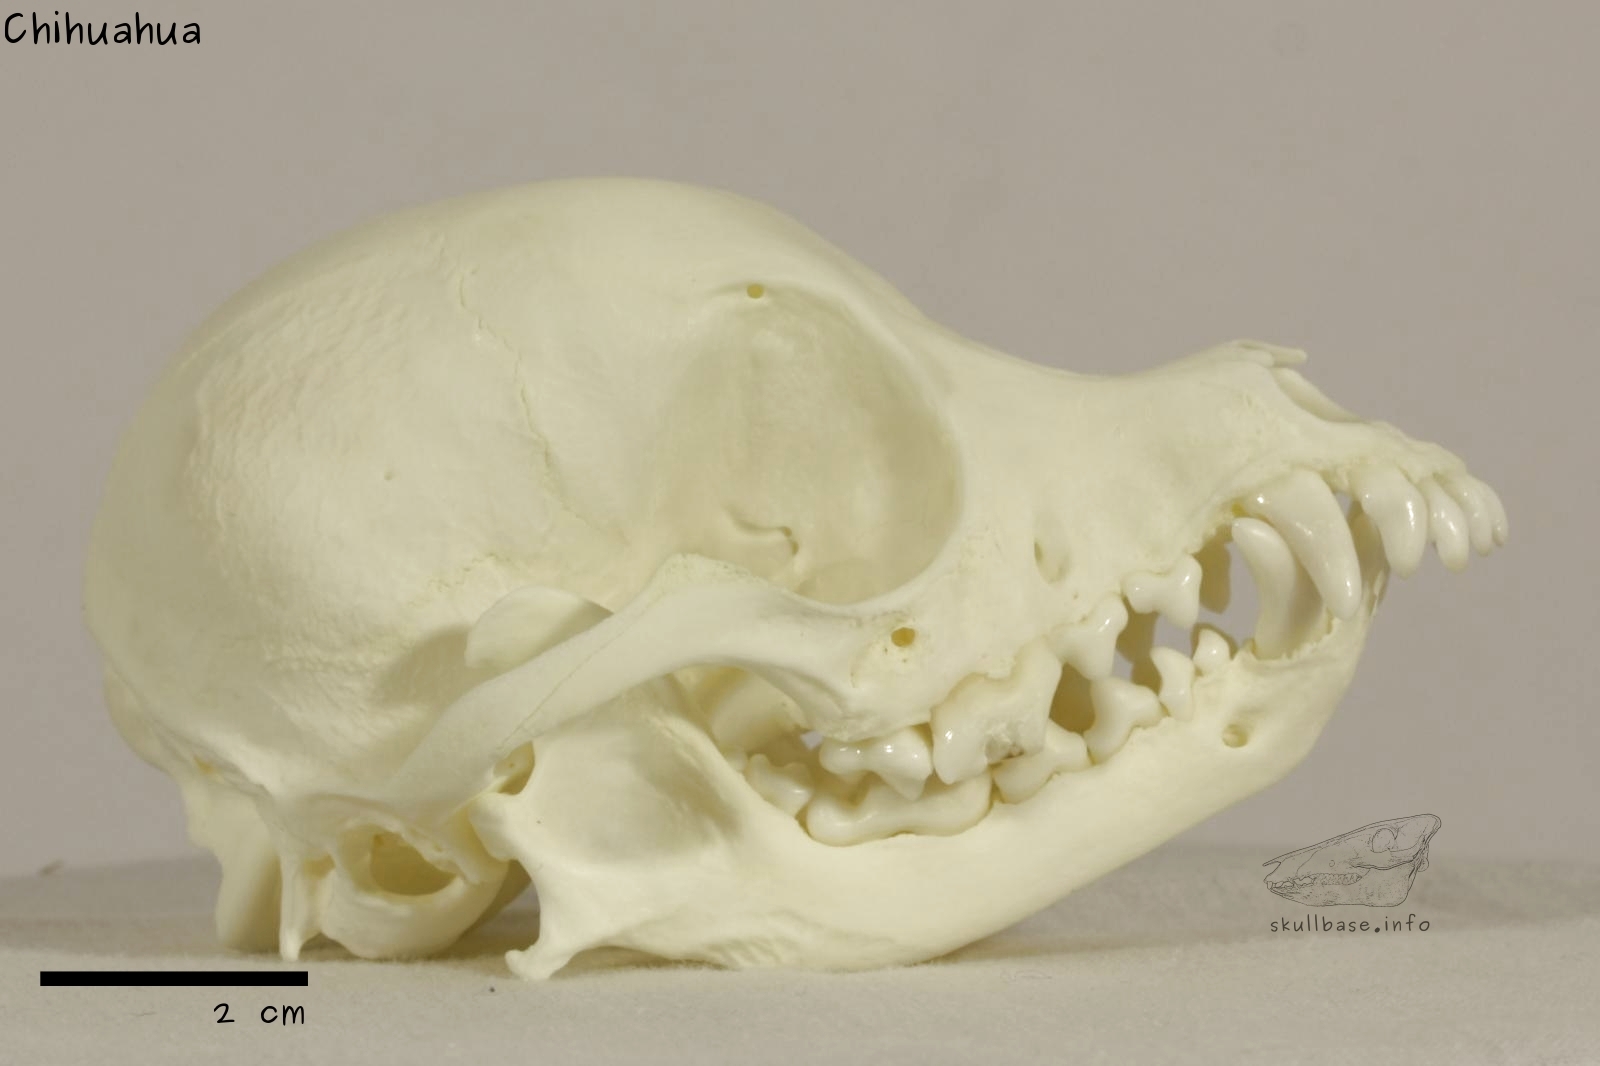 Chihuahua (Canis lupus familiaris) skull lateral view